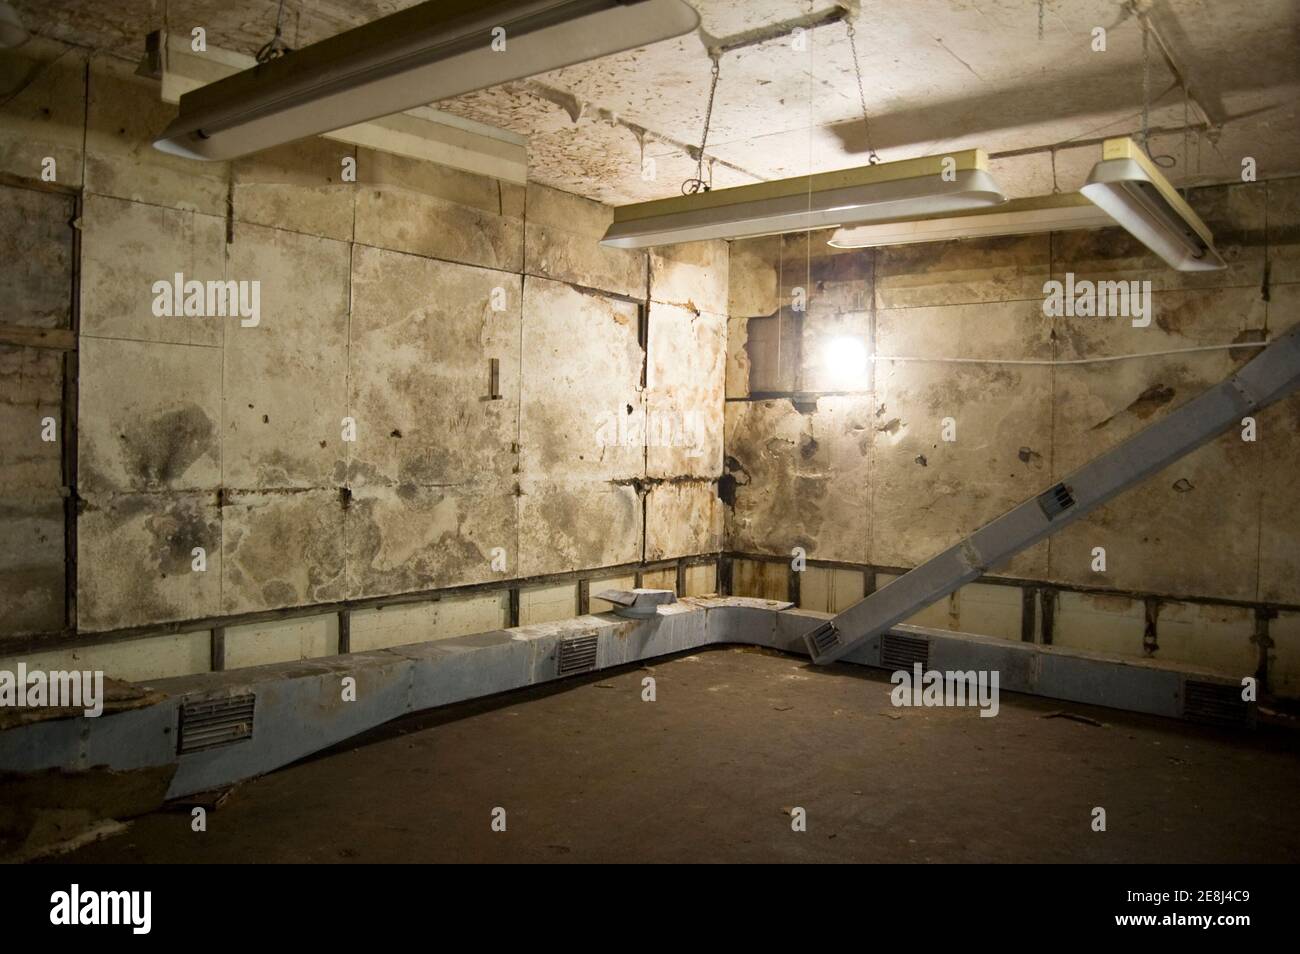 Winston Churchill's Cabinet met in this bunker codenamed Paddock in Dollis Hill, London. The site was top secret until recently. Lighting and air cond Stock Photo